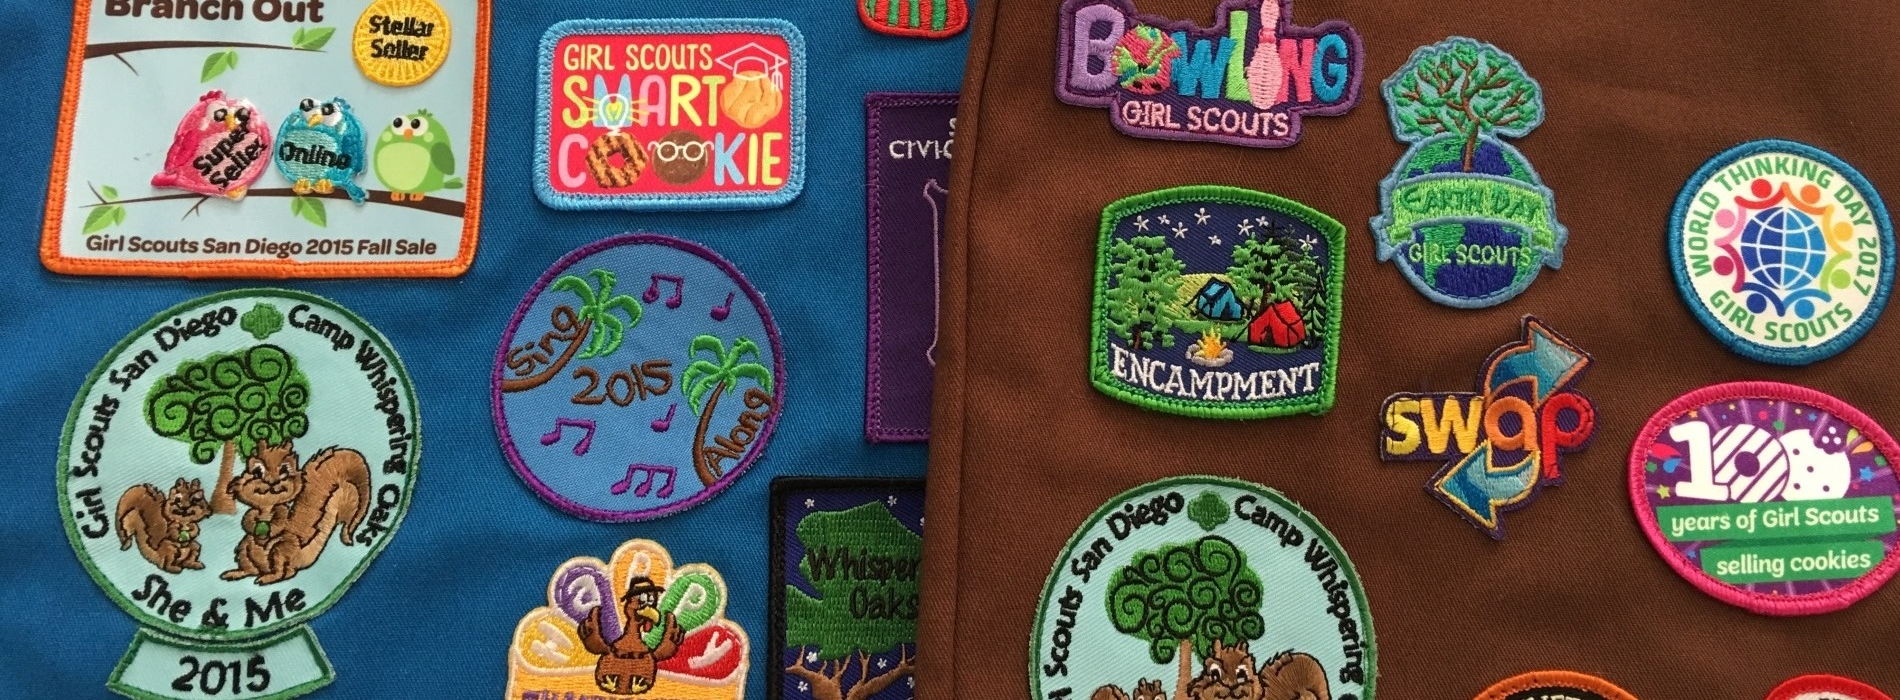 Girl Scout Fun Badge Patch~On Time Registration Clock